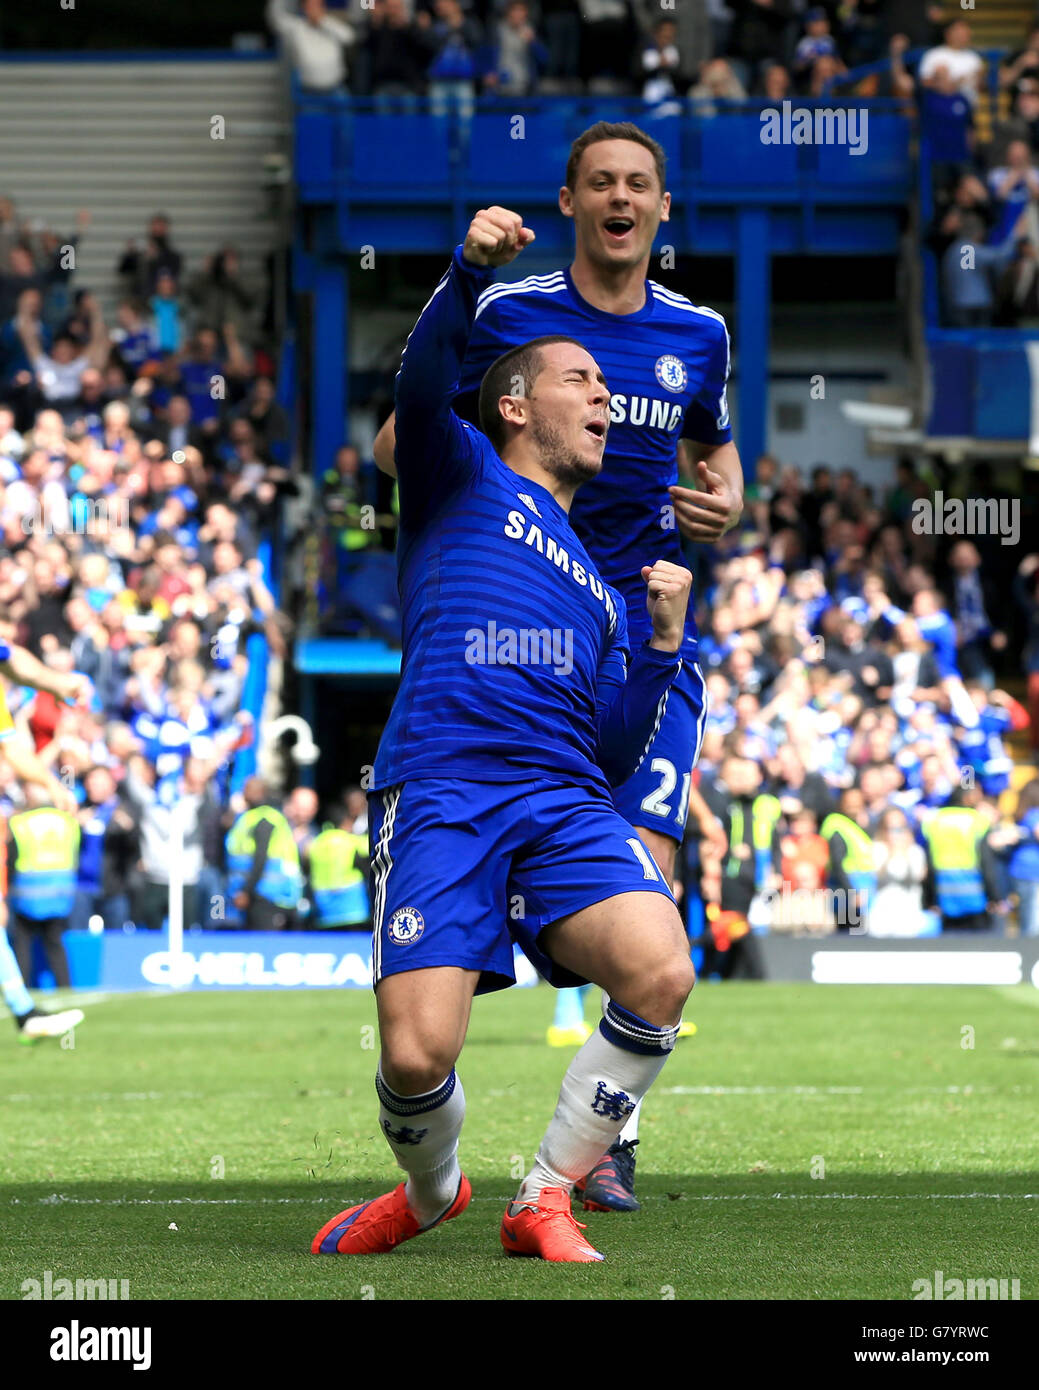 Chelsea's Eden Hazard celebrates after missing his penalty but scoring with the rebound header during the Barclays Premier League match at Stamford Bridge, London. PRESS ASSOCIATION Photo. Picture date: Sunday May 3, 2015. See PA story SOCCER Chelsea. Photo credit should read: Nick Potts/PA Wire. Stock Photo